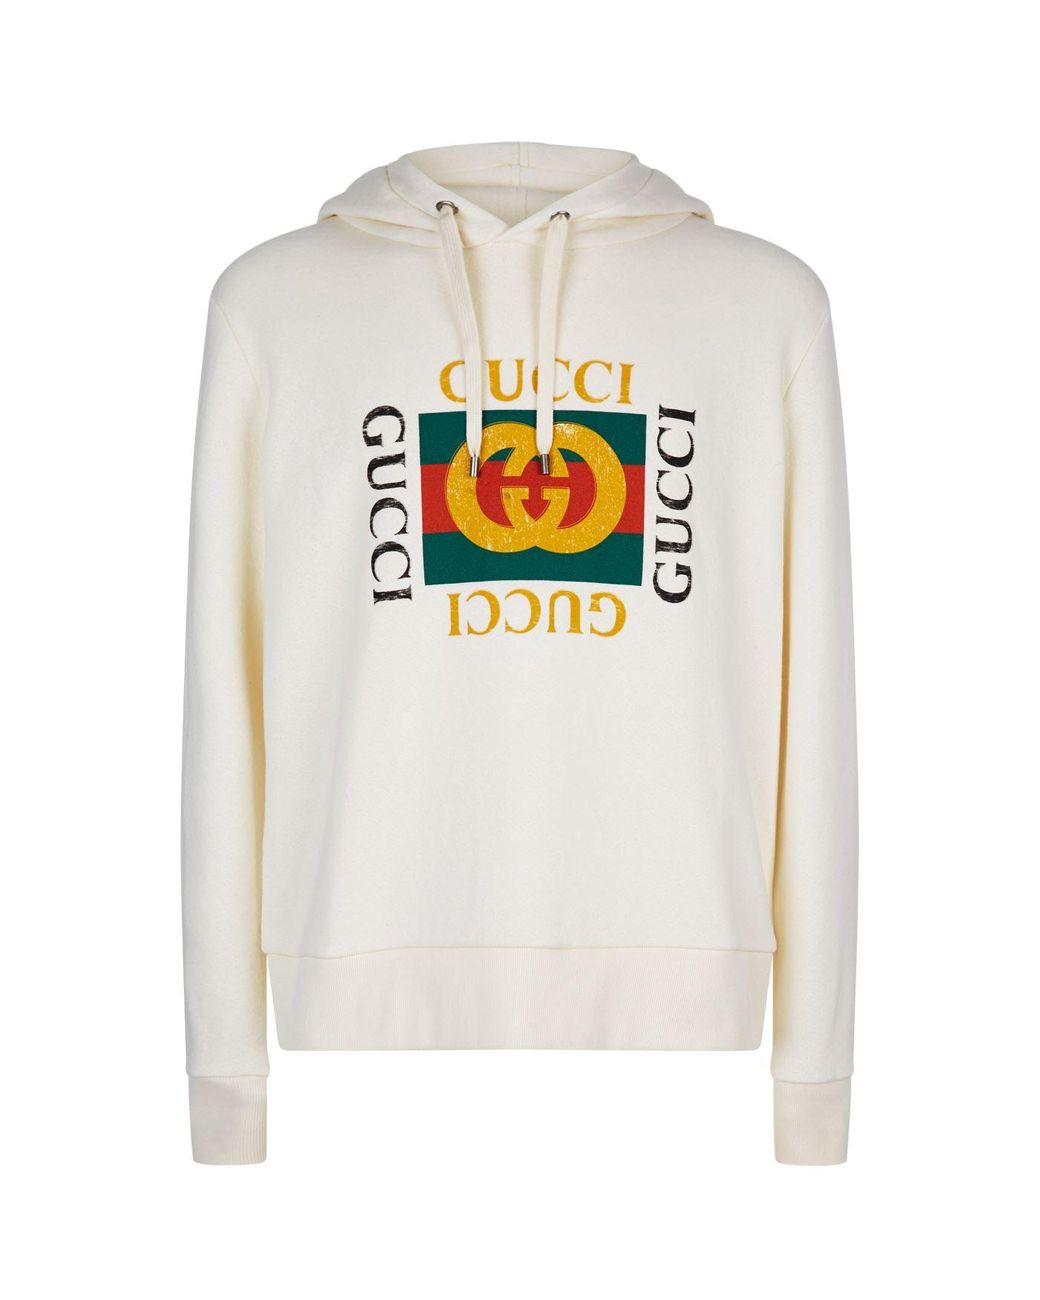 Gucci Fleece Logo Hoodie in Ivory,Black (White) for Men - Save 16% - Lyst